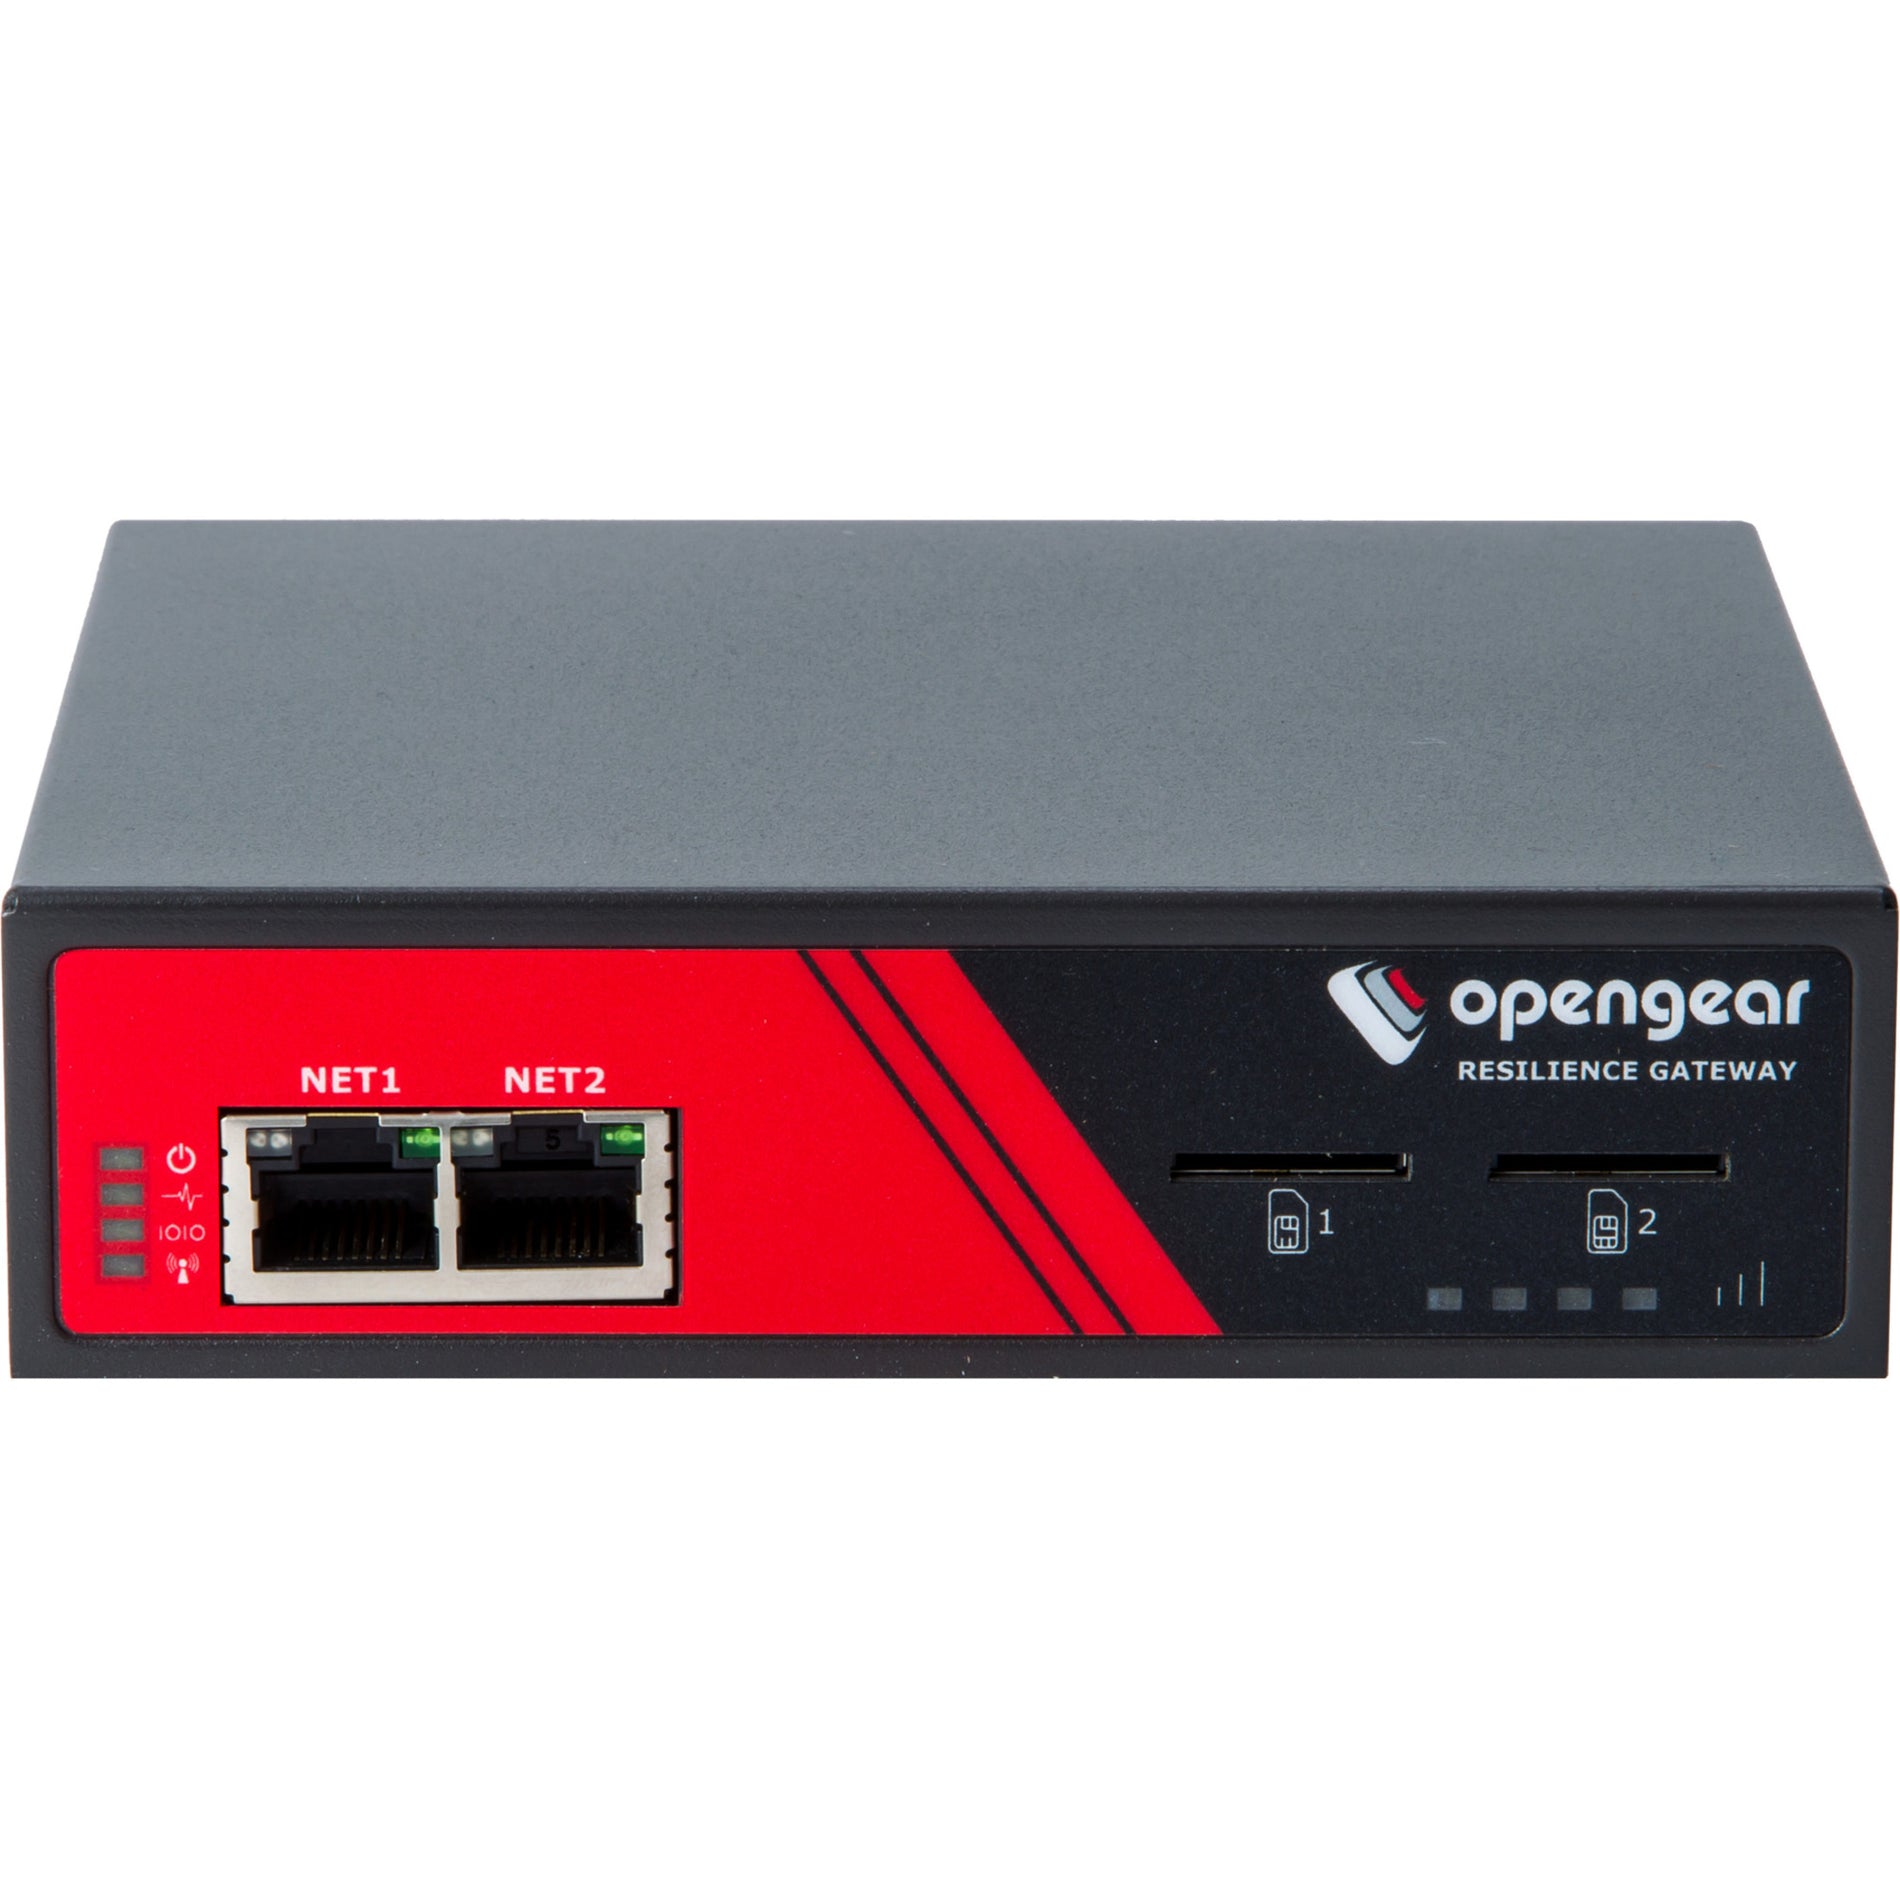 Opengear ACM7008-2-L Resilience Gateway, Remote Monitoring, Remote Management